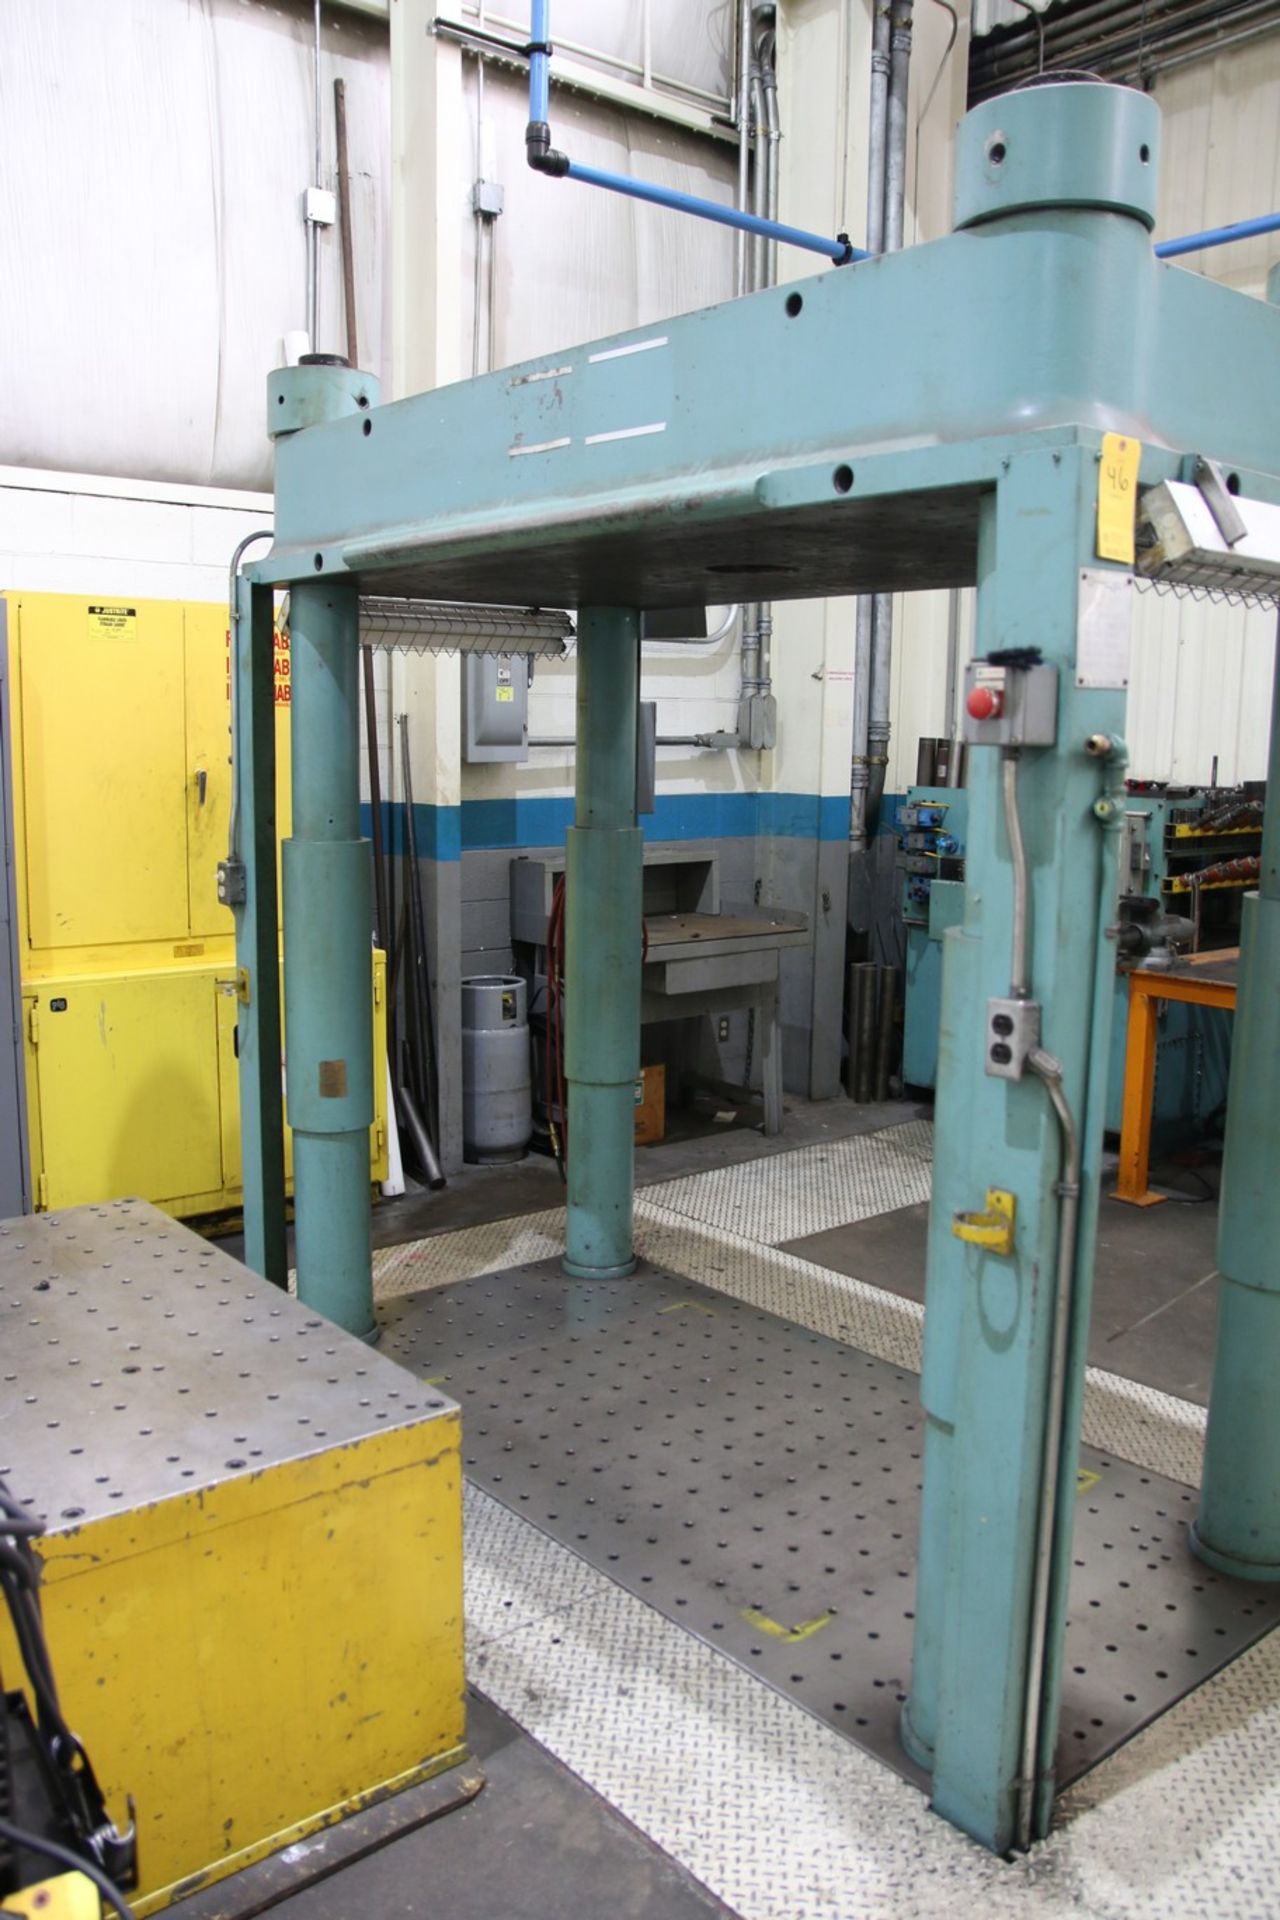 150 Ton 4-Post Hydraulic Spotting Press Includes 37" x 51" x 24" H Setup Table - Image 2 of 7